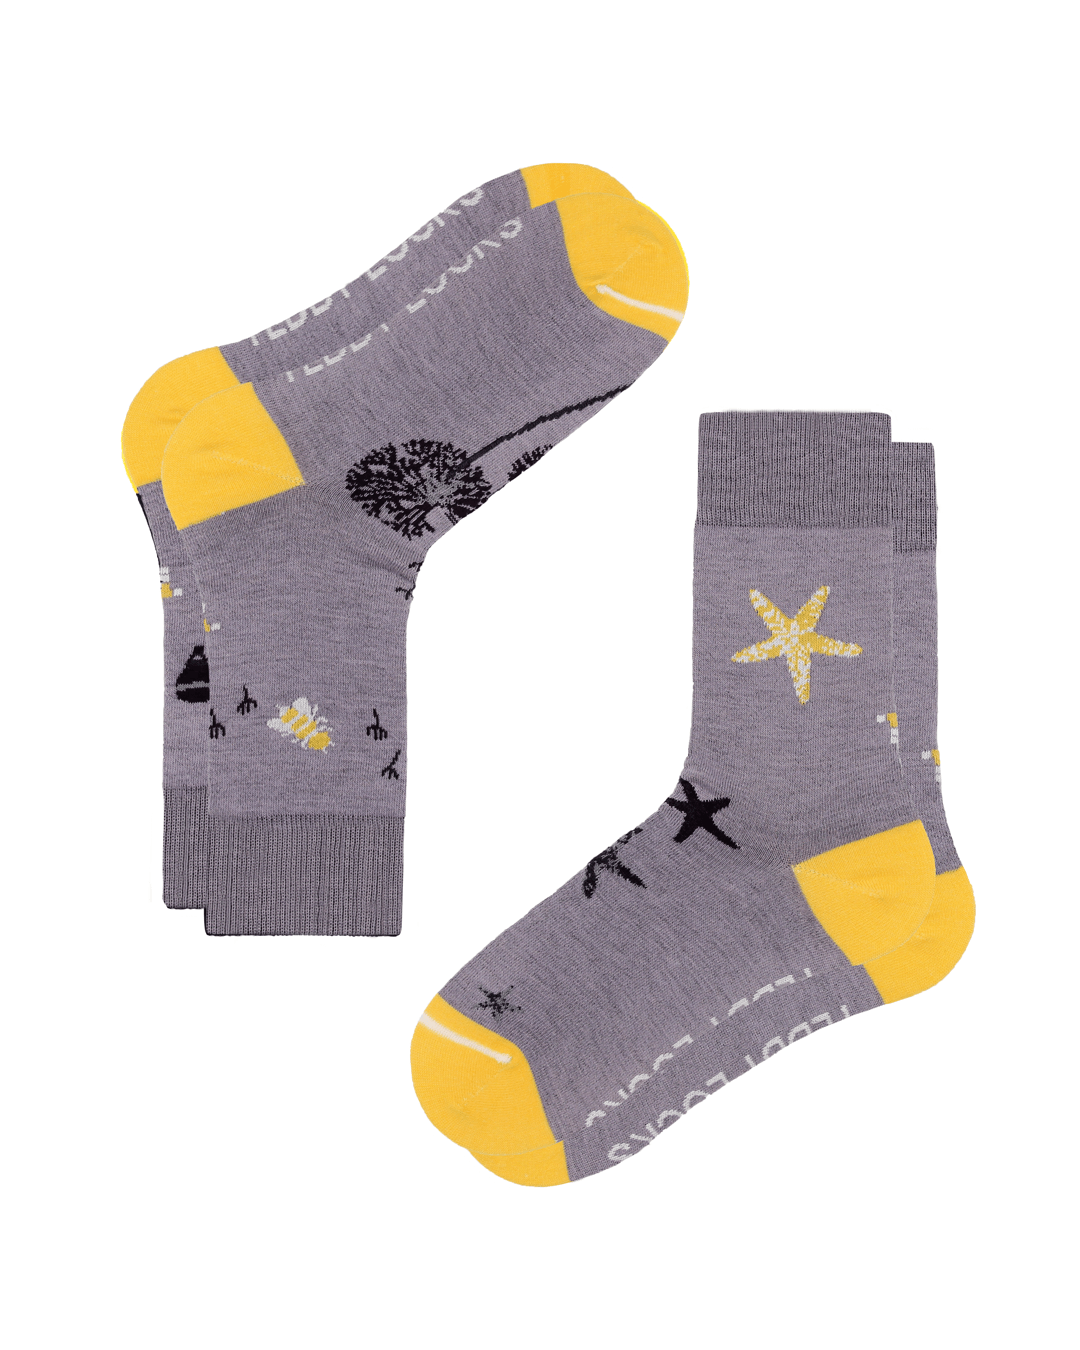 womens crew socks. Light purple ecofriendly socks for women. Yellow patterned socks with hot air ballloon bumble bee pirate-ship and starfish patterns. 